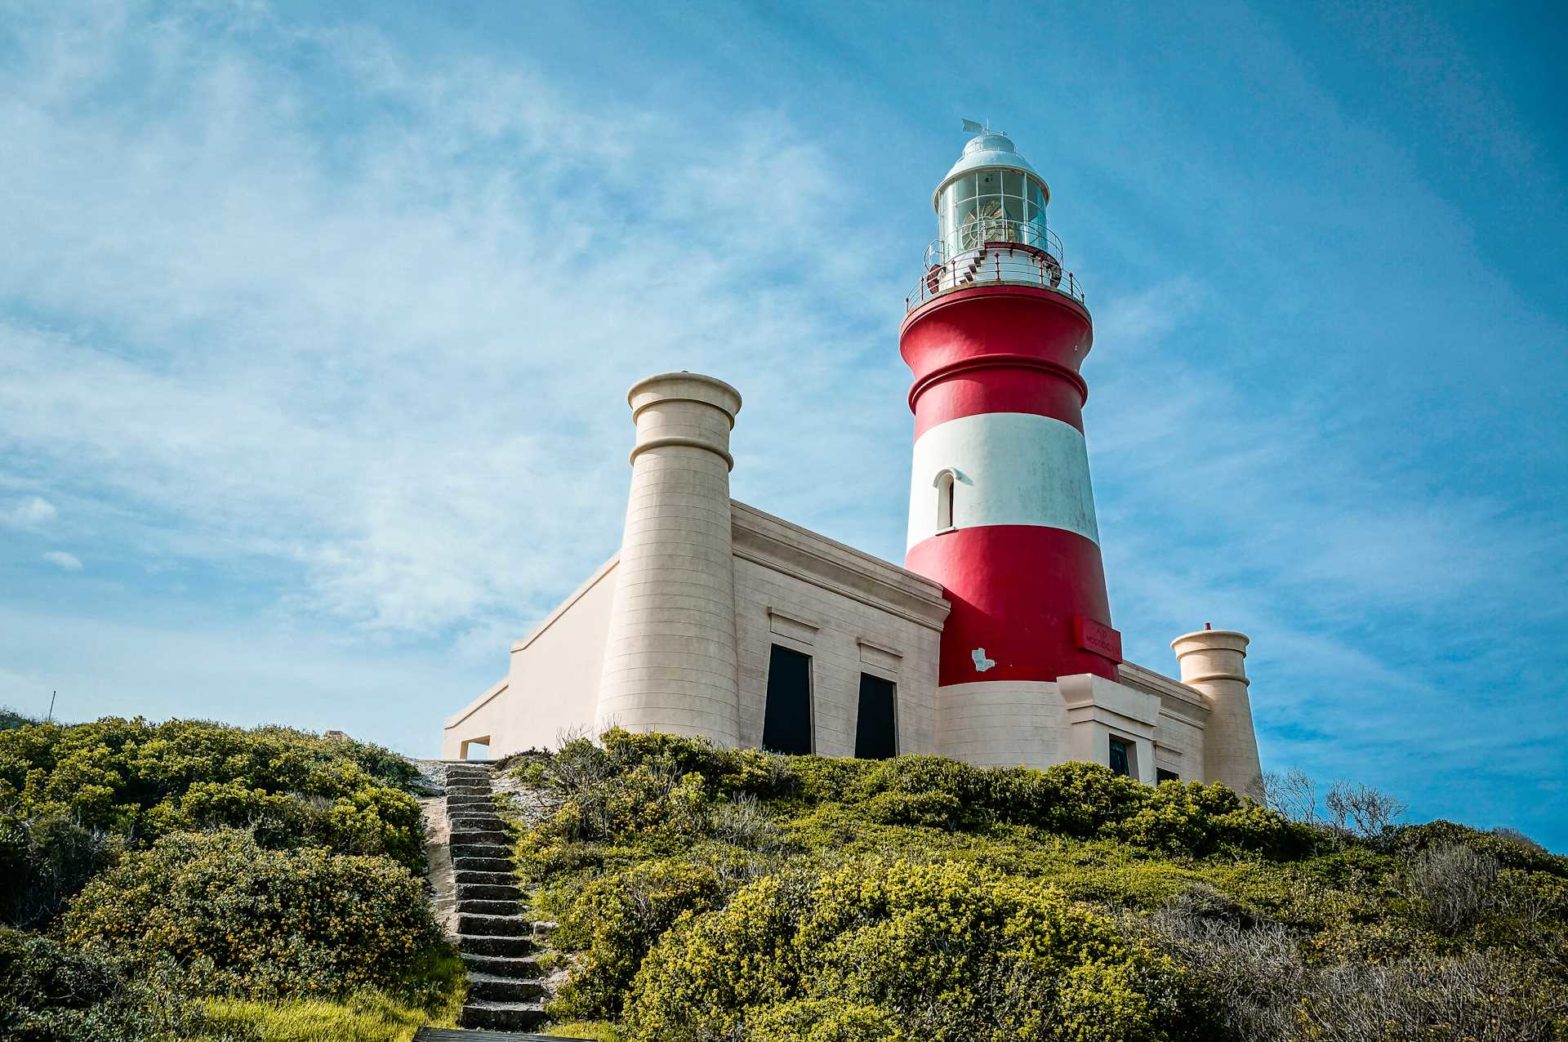 The historic Cape Agulhas Lighthouse at the southern tip of Africa in South Africa.